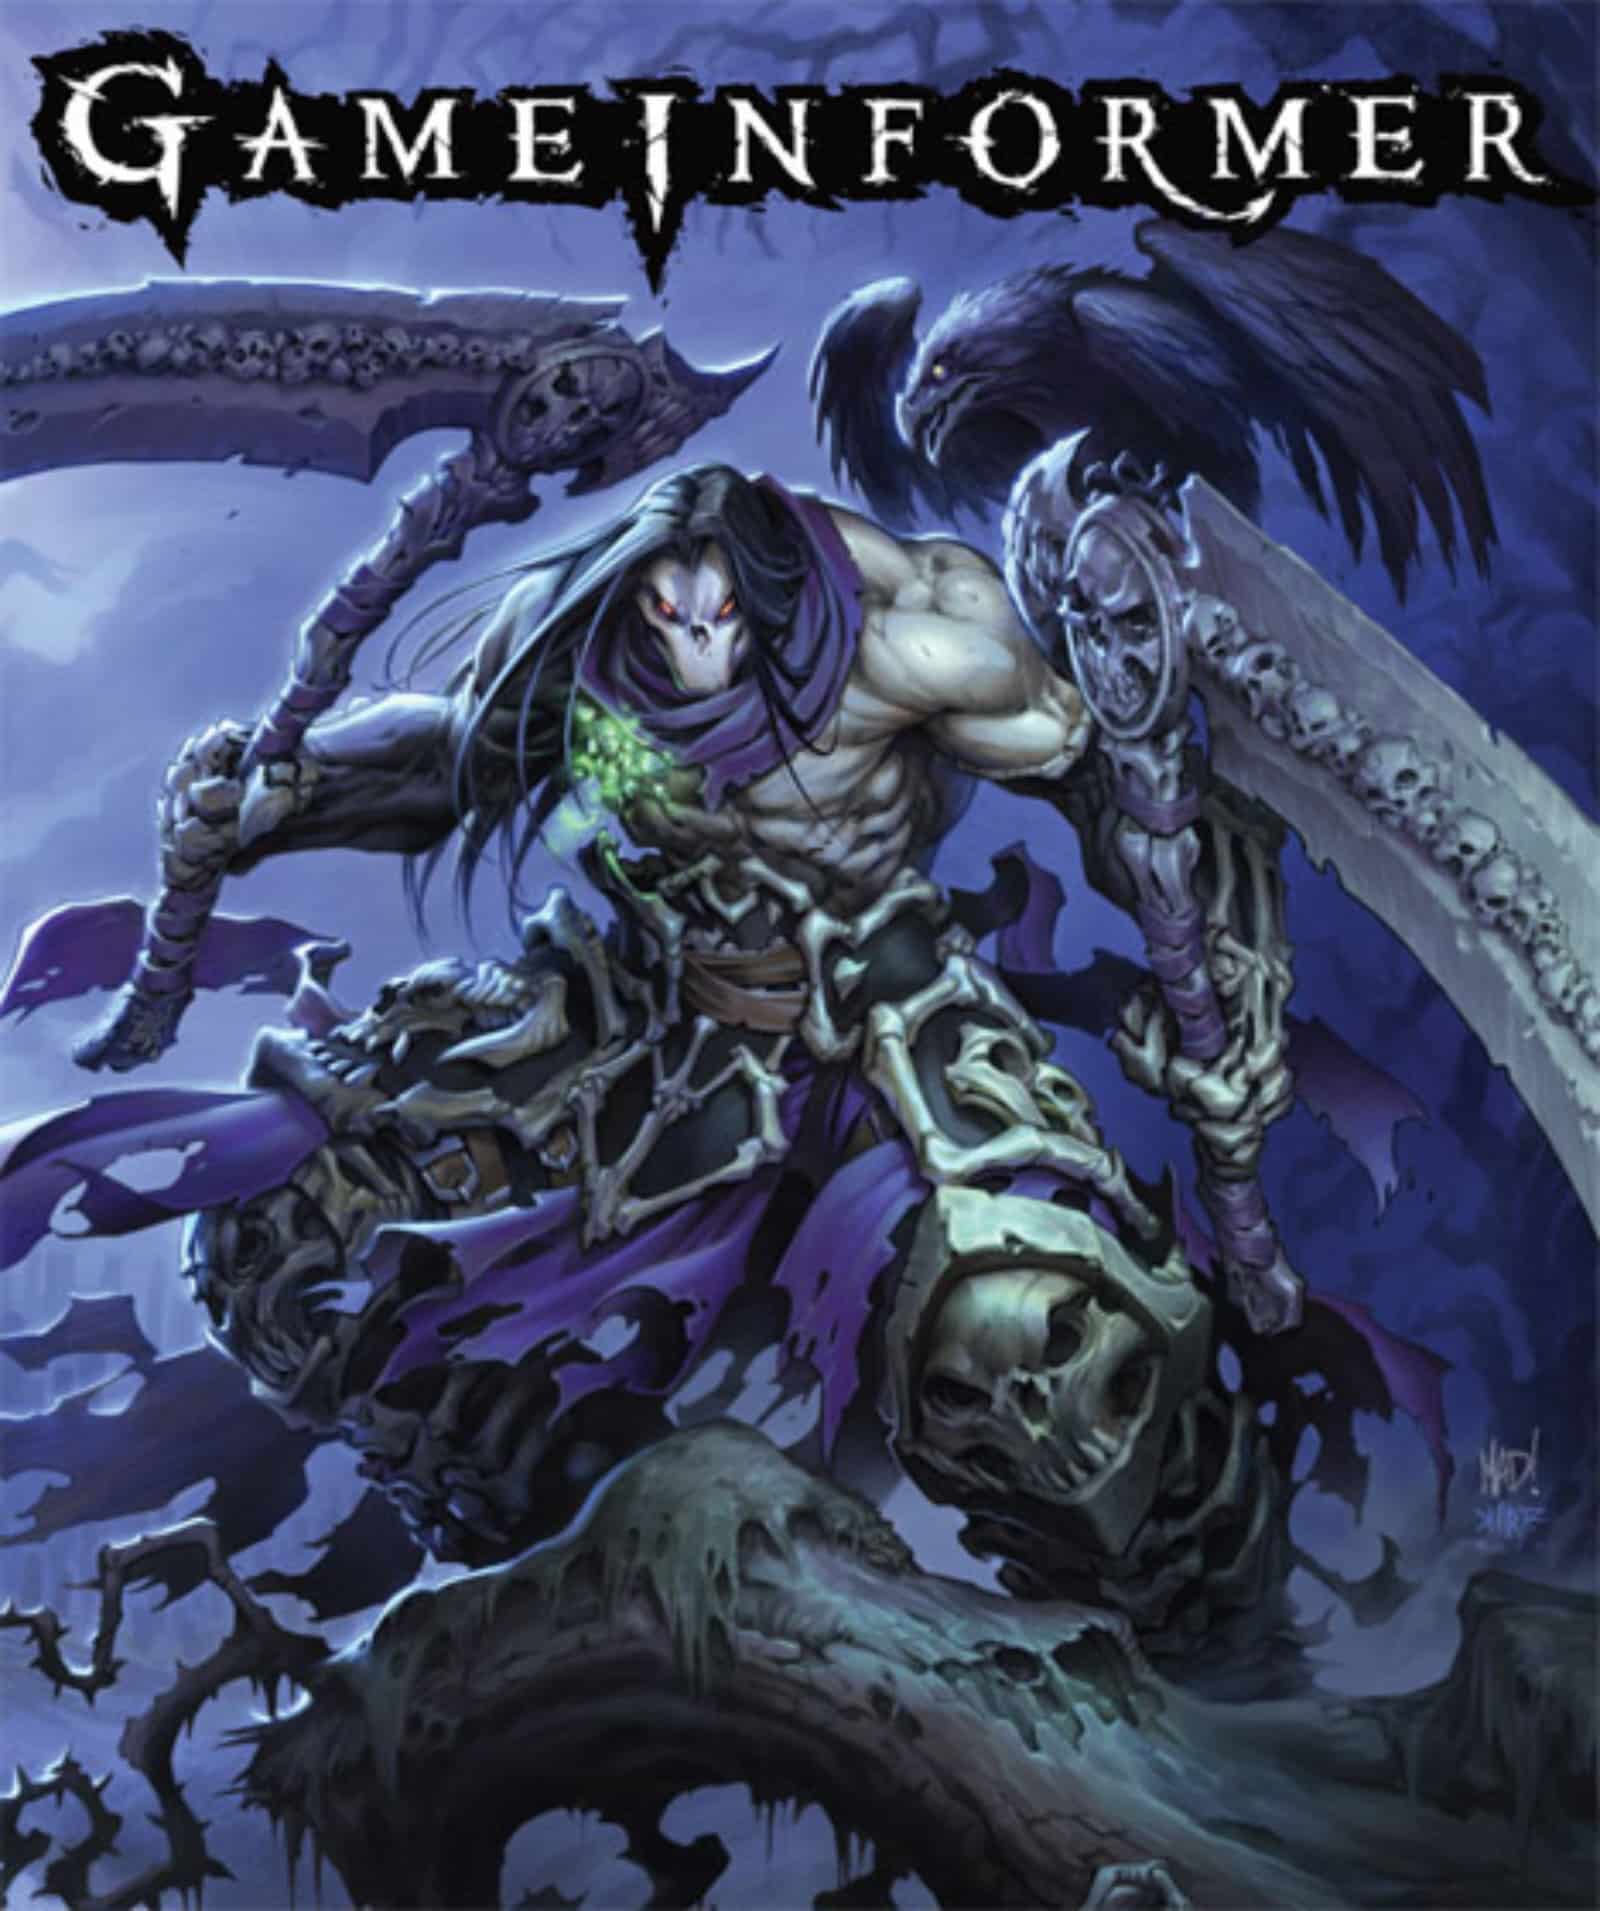 Darksiders 2 announced with Death in the lead for Xbox 360, PS3 and PC
